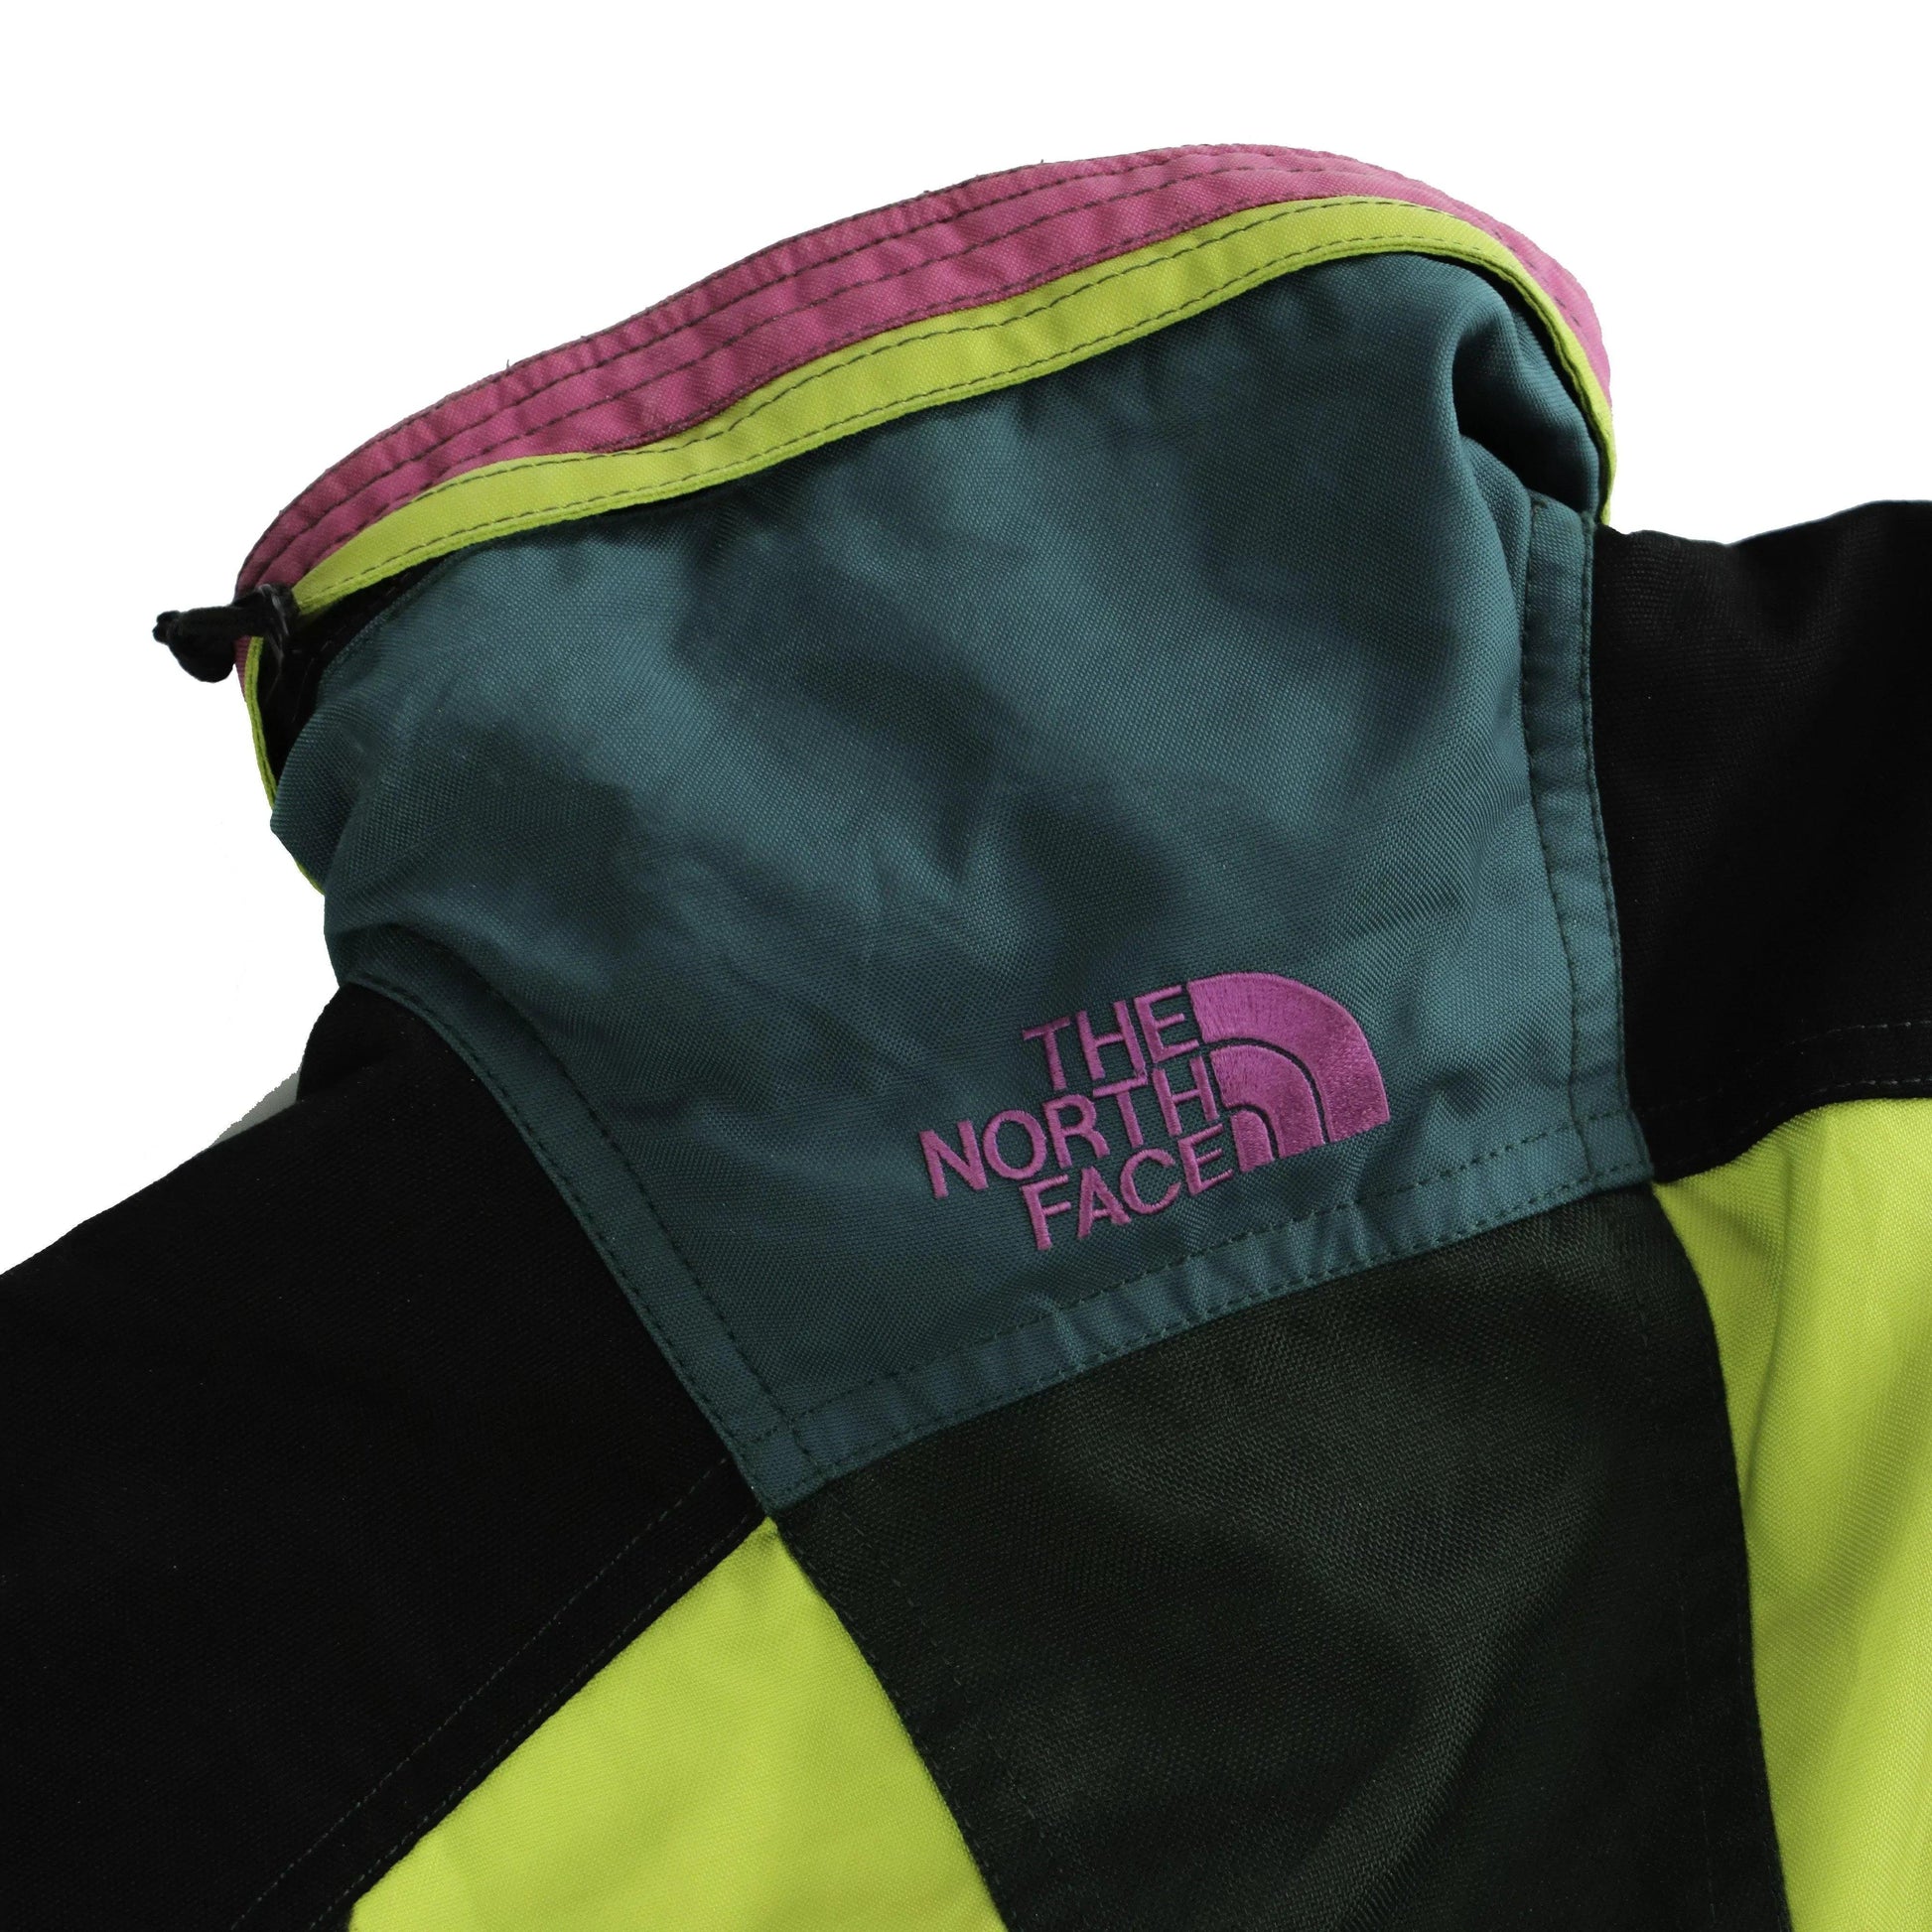 THE NORTH FACE SKIWEAR JACKET (M) - Known Source